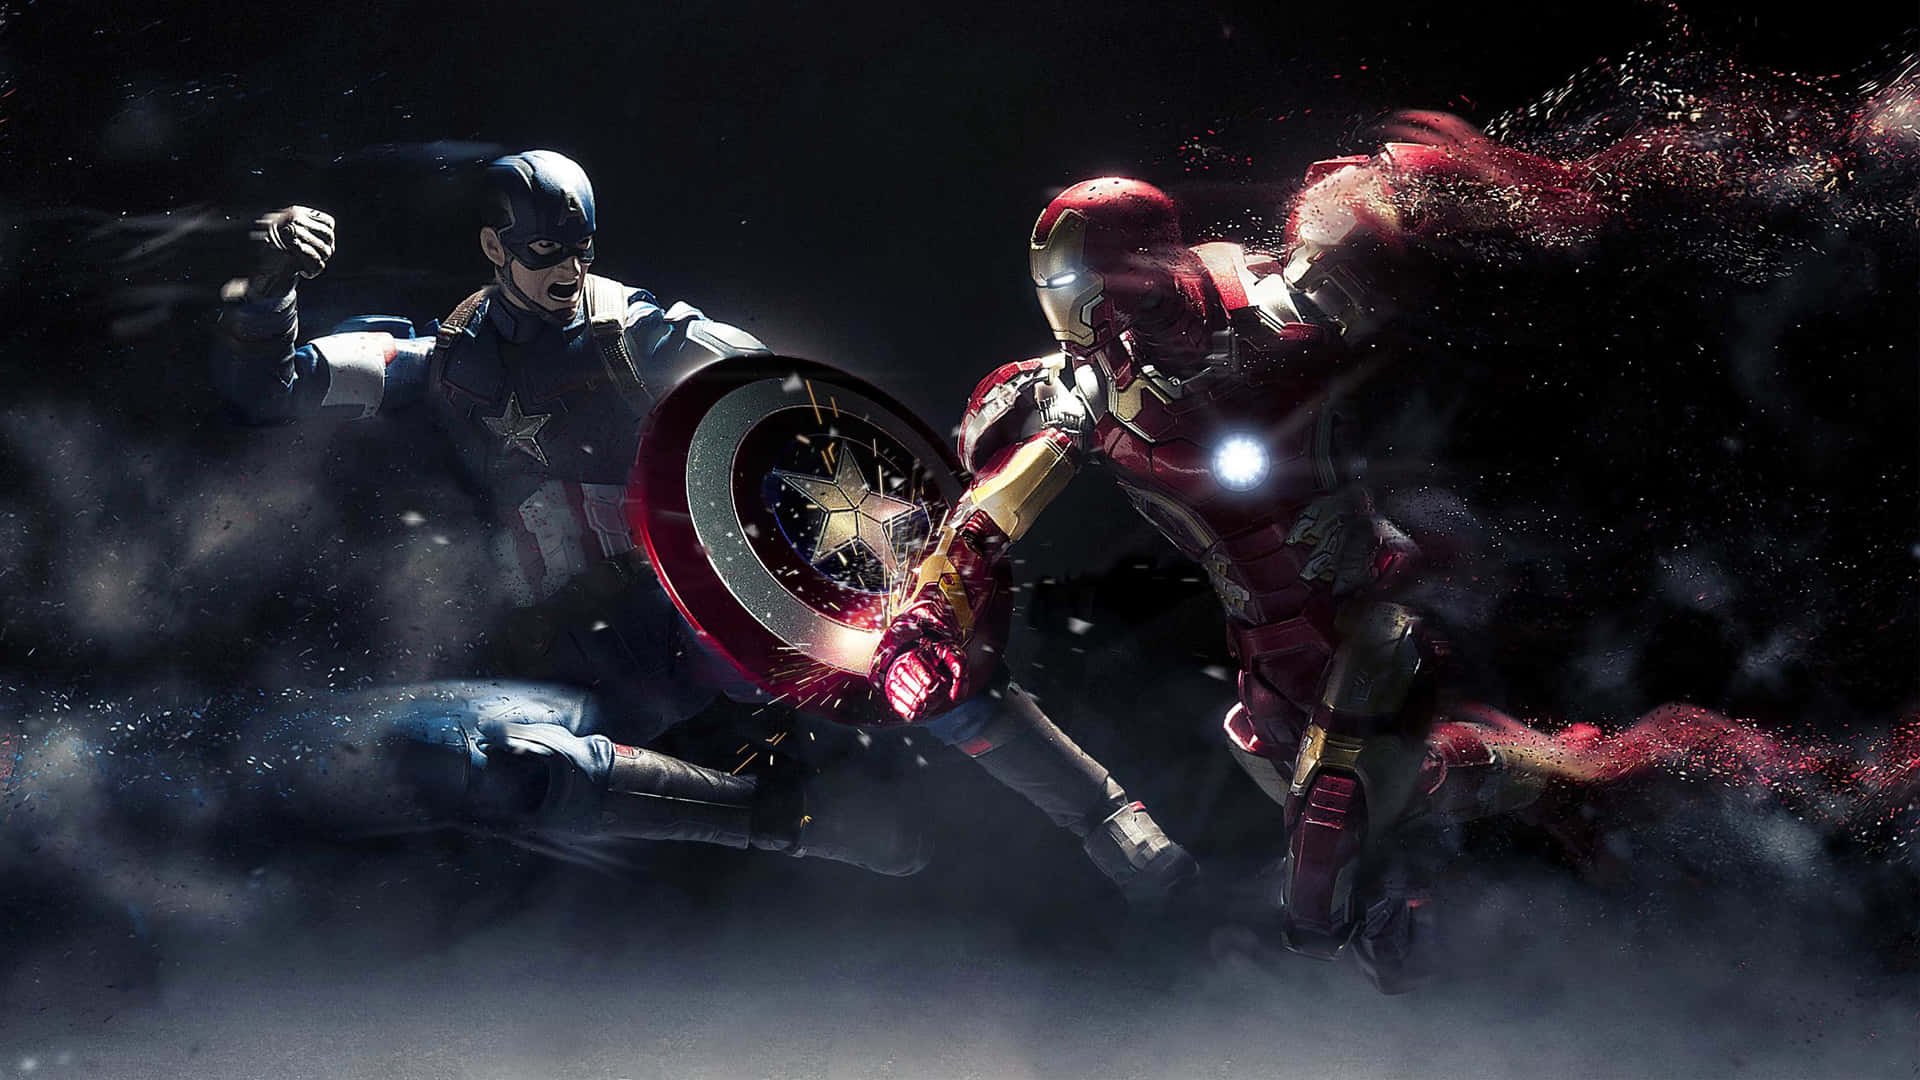 Get lost in the Marvel world this weekend with Captain America Wallpaper